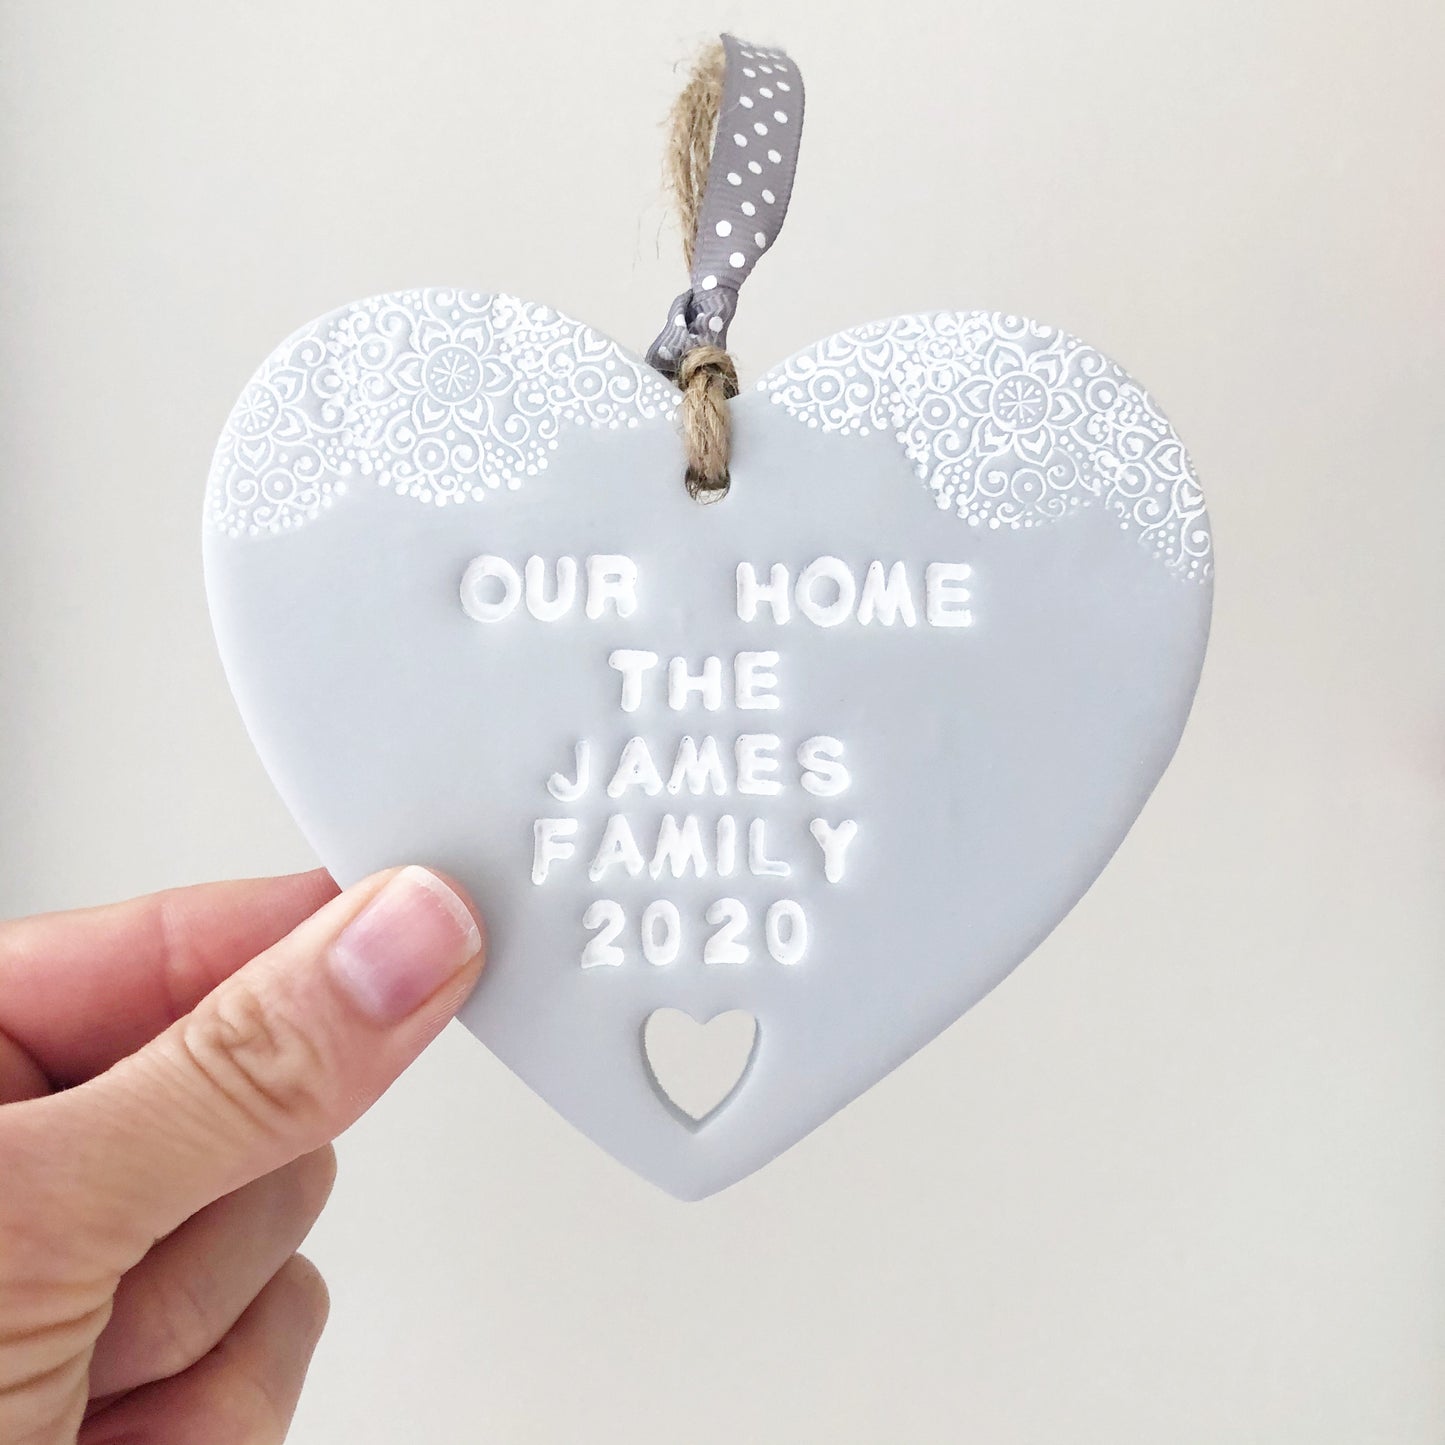 Personalised housewarming new home gift, grey clay heart with a white lace edge at the top of the heart and a heart cut out at the bottom with jute twine for hanging, the heart is personalised with OUR HOME THE JAMES FAMILY 2020